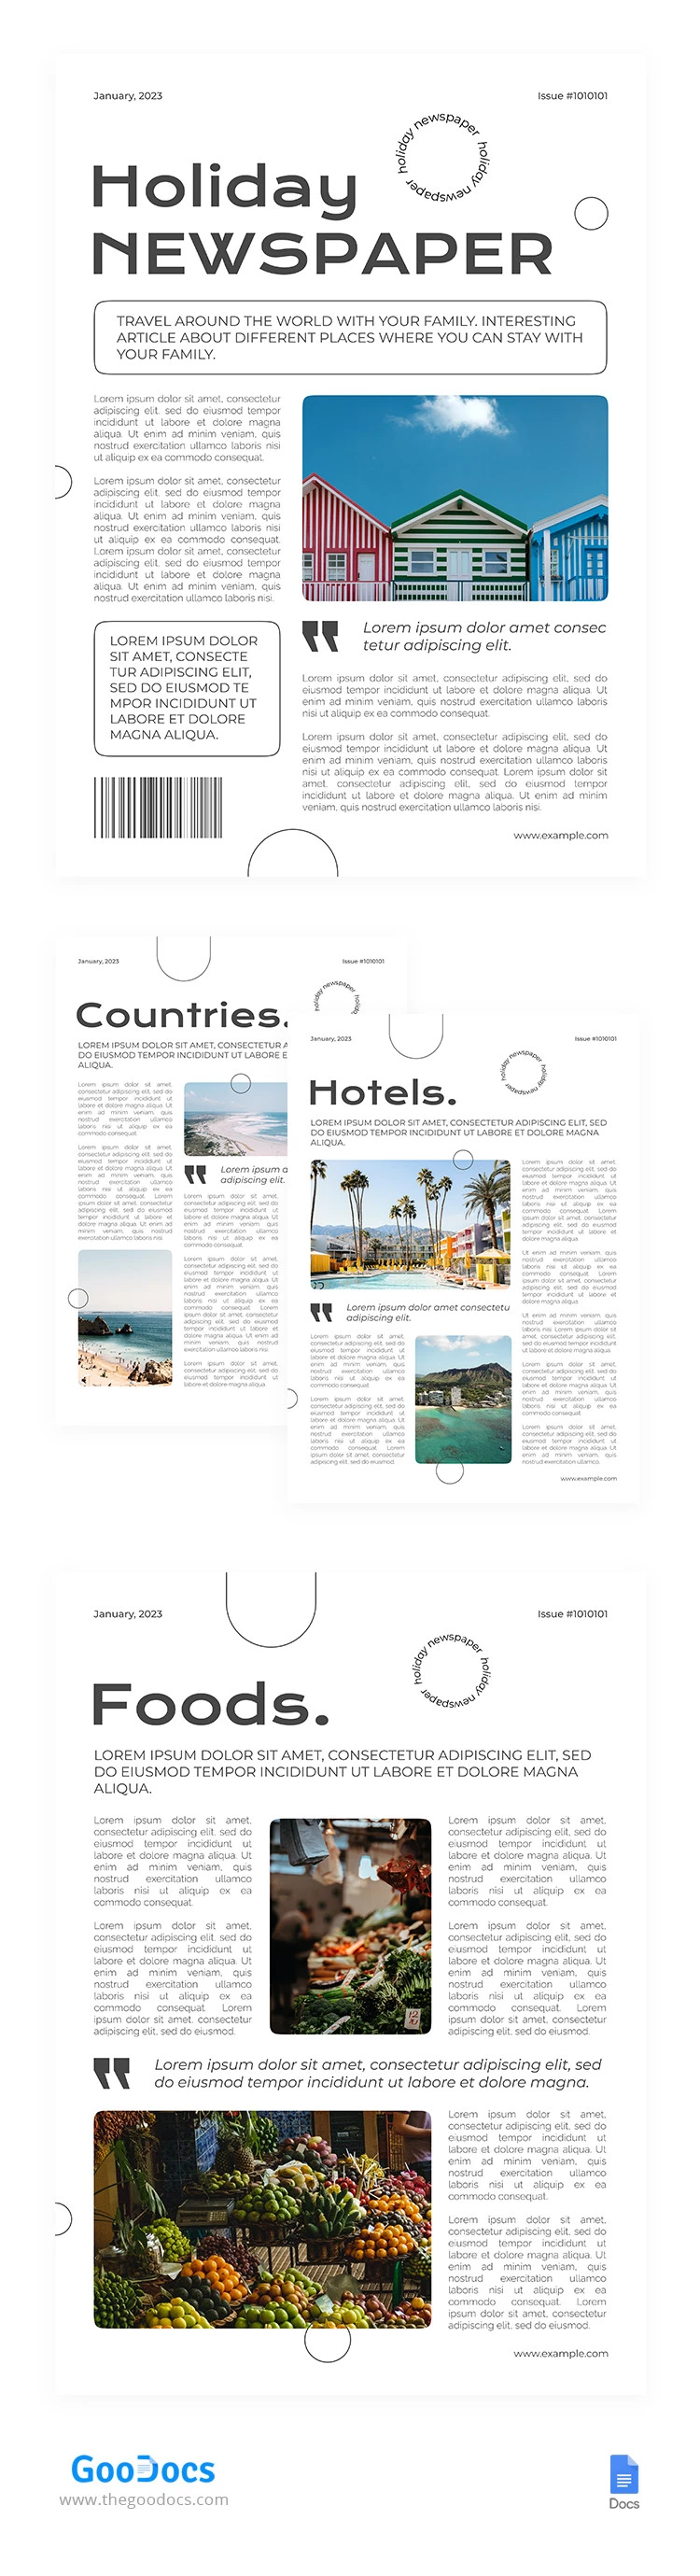 Simple White Holiday Newspaper - free Google Docs Template - 10065378